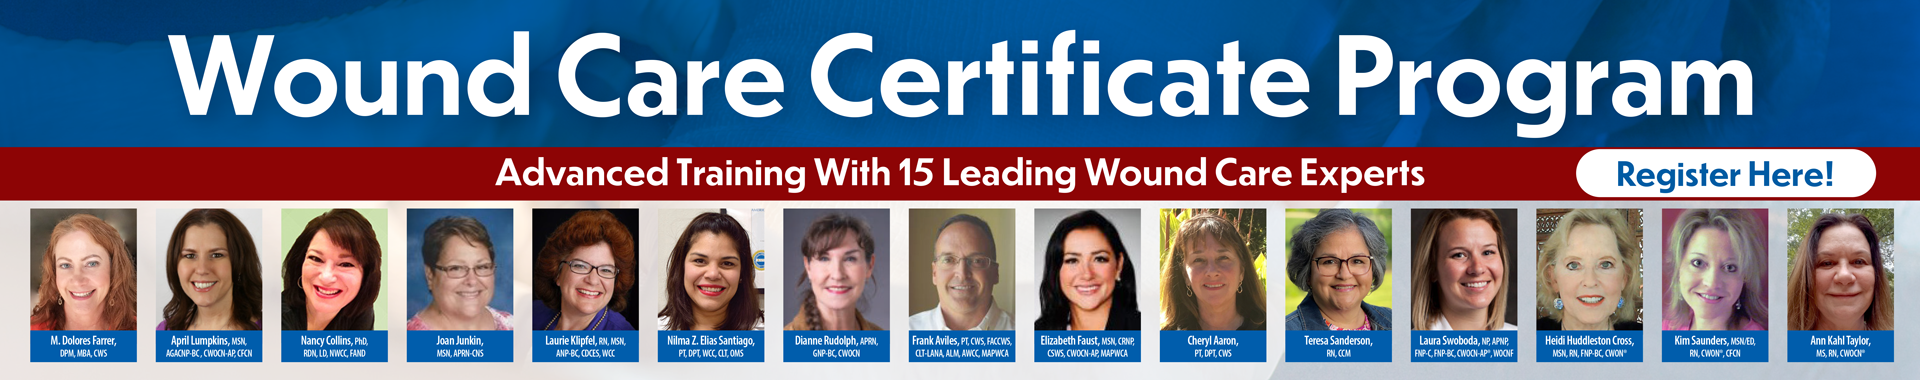 Wound Care Certificate Program: Advanced Training With 15 Leading Wound Care Experts